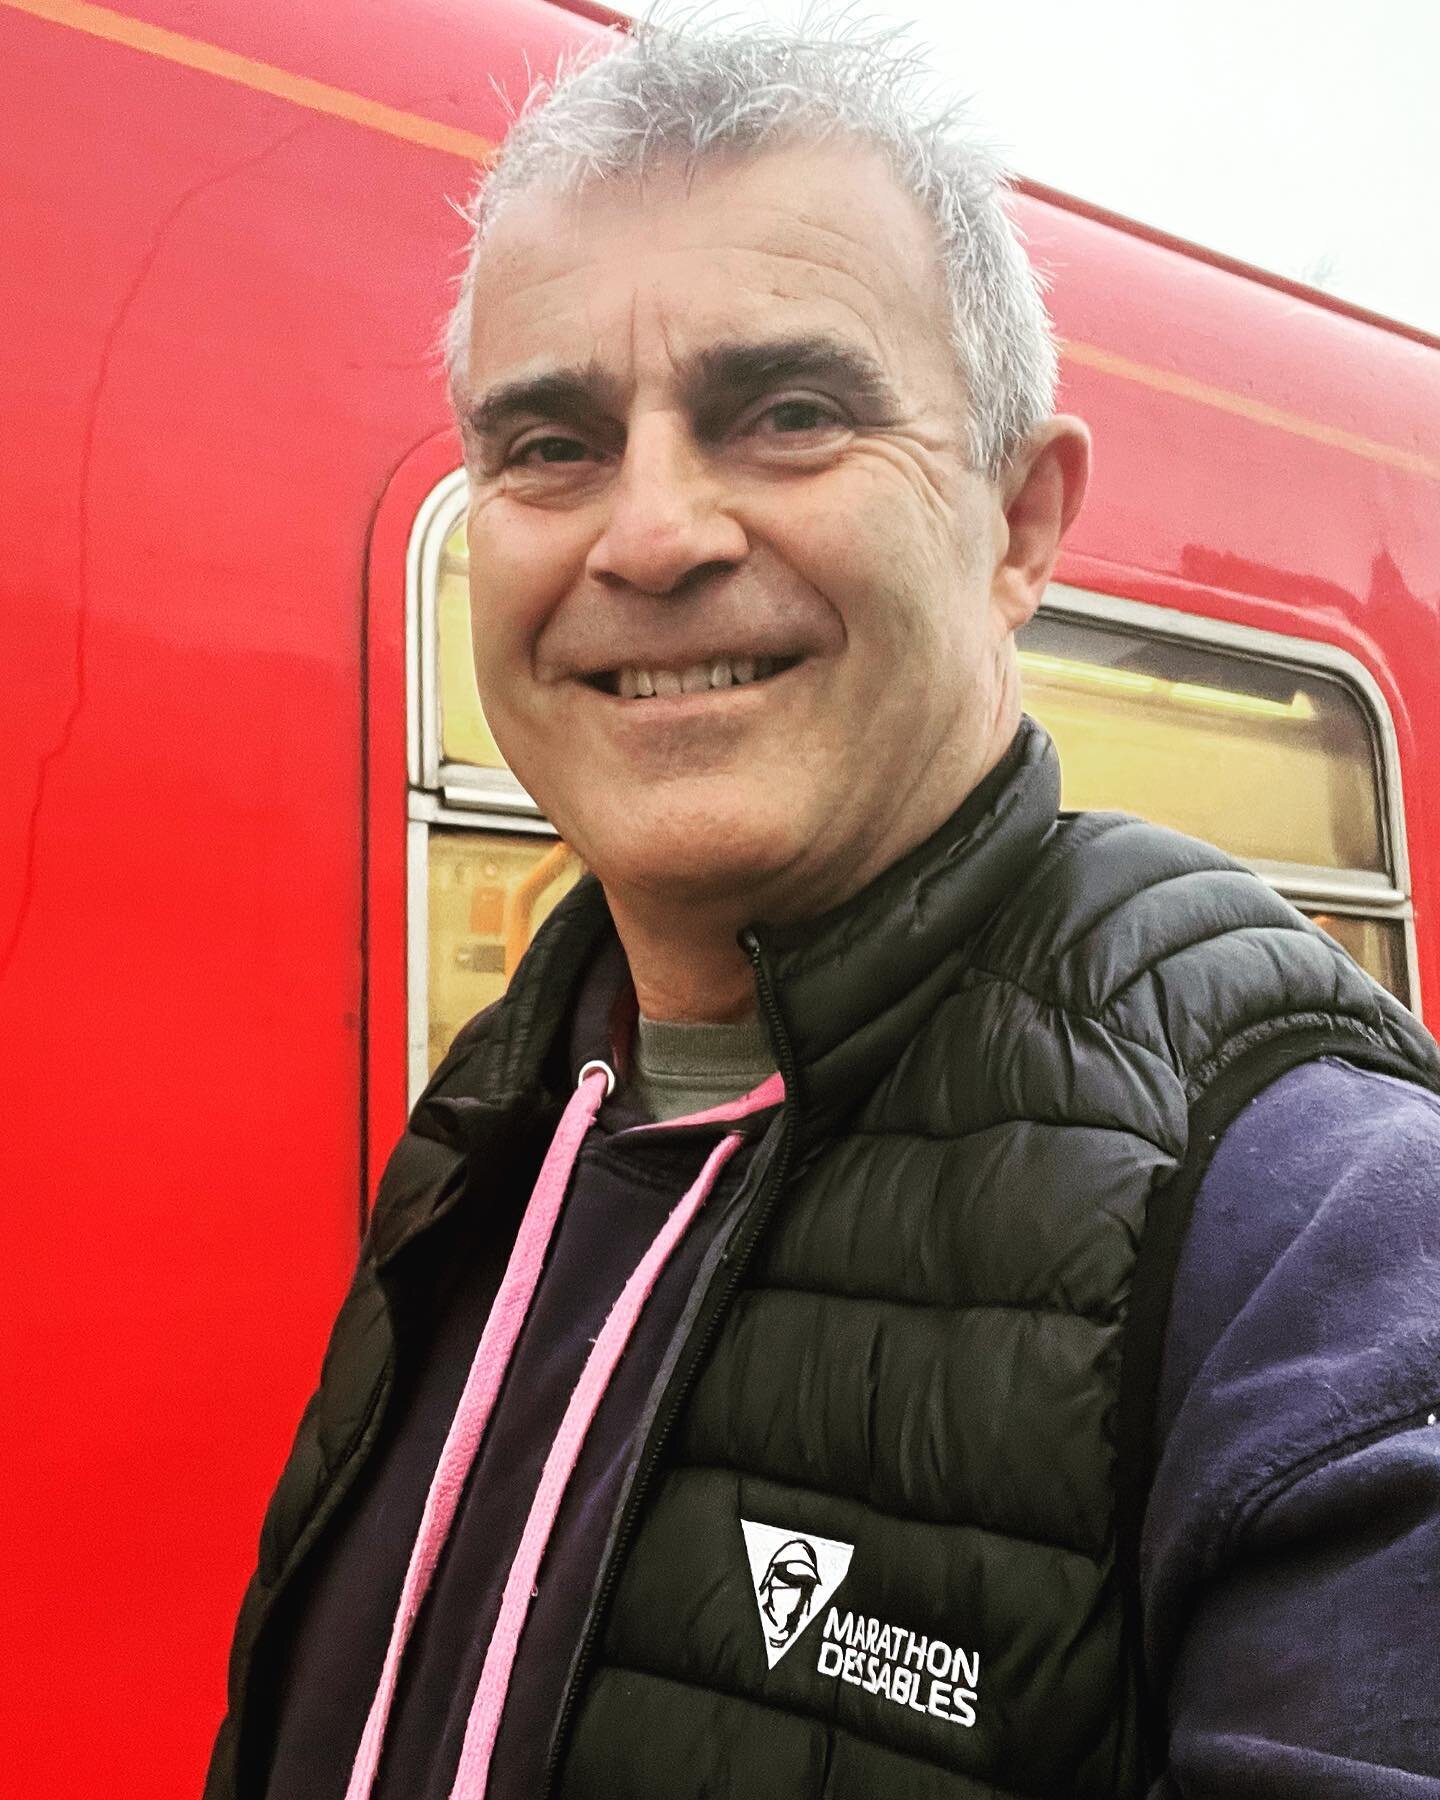 On the train to the brilliant #mds expo today. See you all there a bit later this morning.
🏃👣🏃&zwj;♂️🥇 #marathondessables #ultrarunner #ultrarunning #madforthedesert